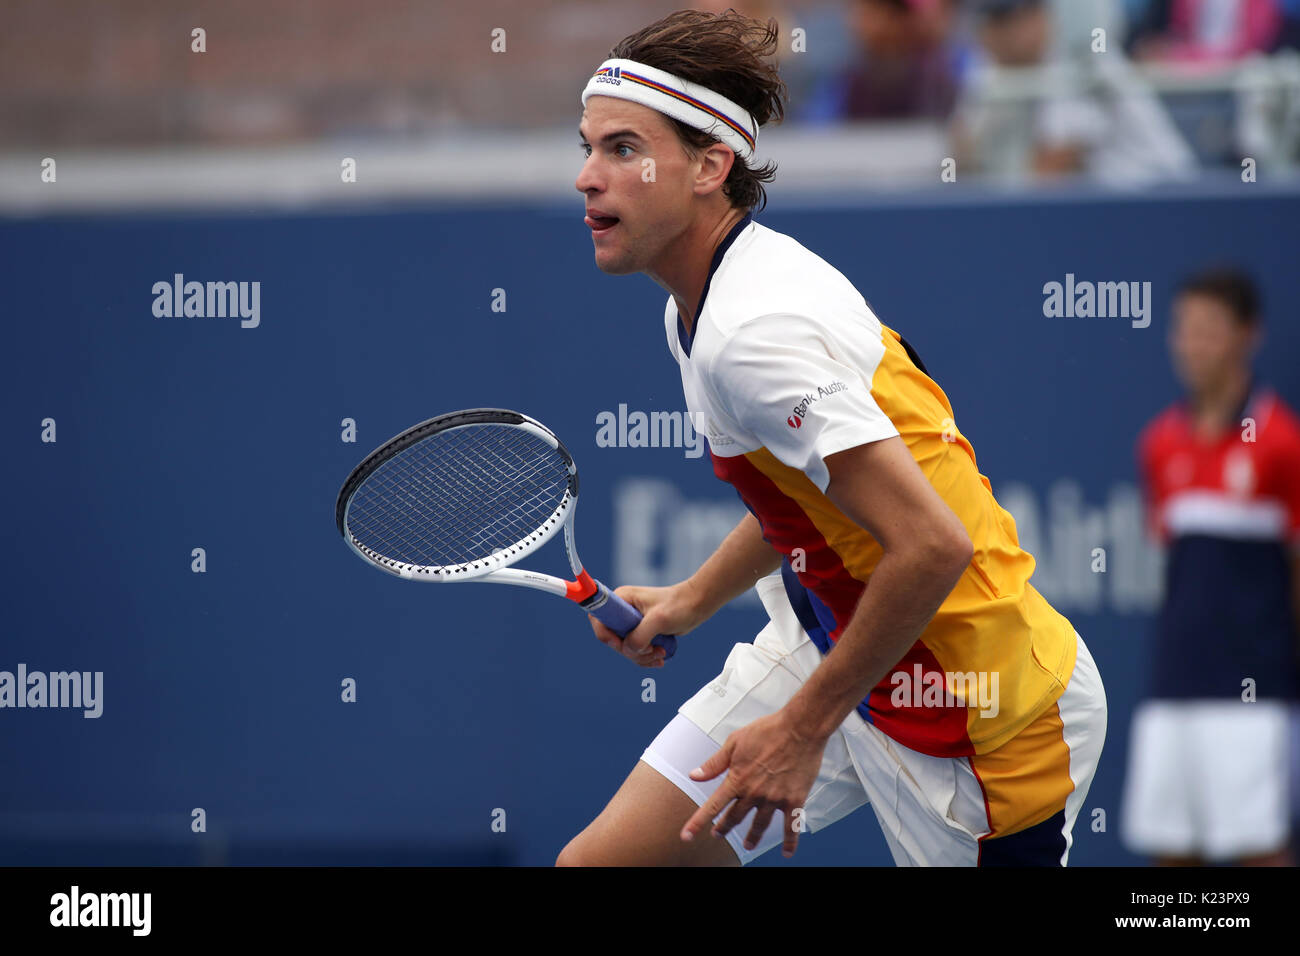 New York, United States. 29th Aug, 2017. US Open Tennis: New York, 29 August, 2017 -Dominic Thiem of Austria in action against Alex de Minaur of Australia during their first round match at the US Open in Flushing Meadows, New York. Credit: Adam Stoltman/Alamy Live News Stock Photo